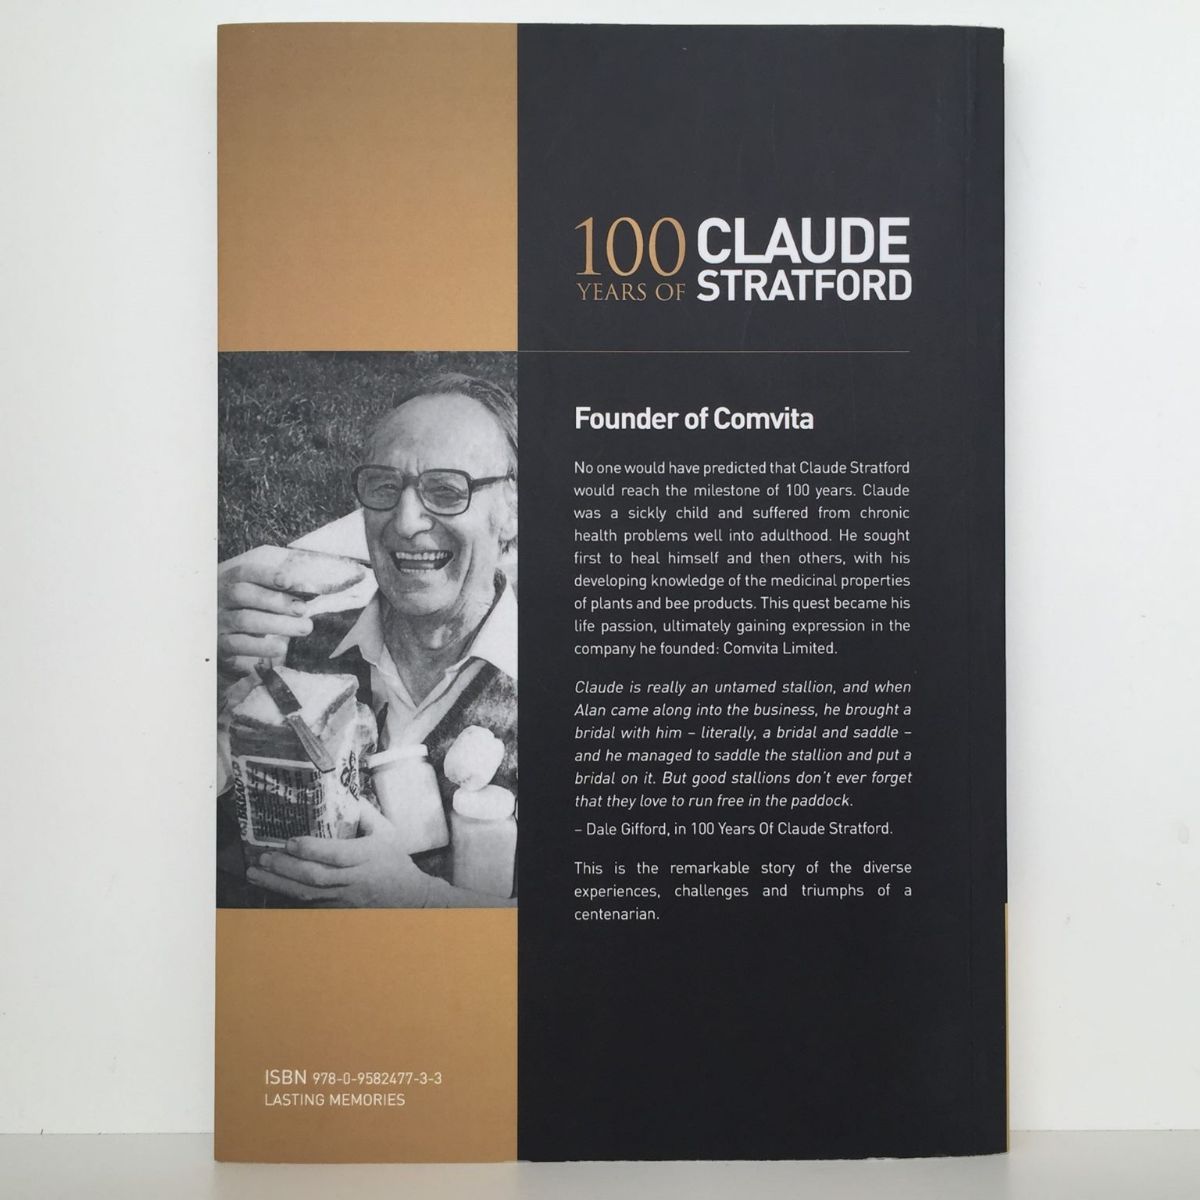 100 YEARS OF CLAUDE STRATFORD